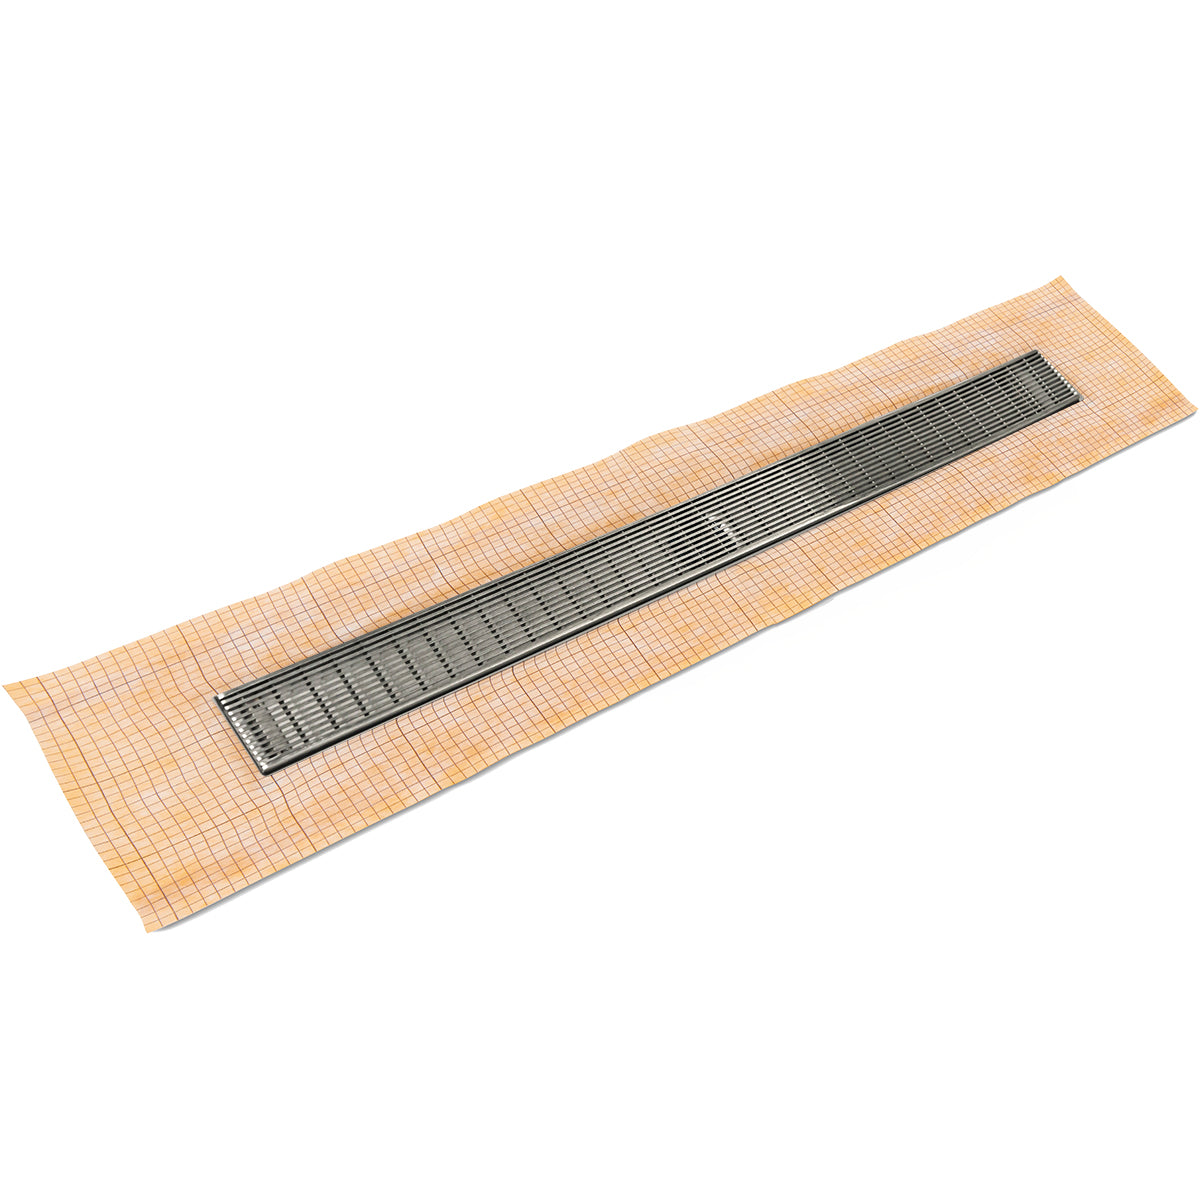 Infinity Drain 60" FCS Series Schluter-Kerdi - Fixed Flange Linear Drain Kit with 2 1/2" Wedge Wire Grate